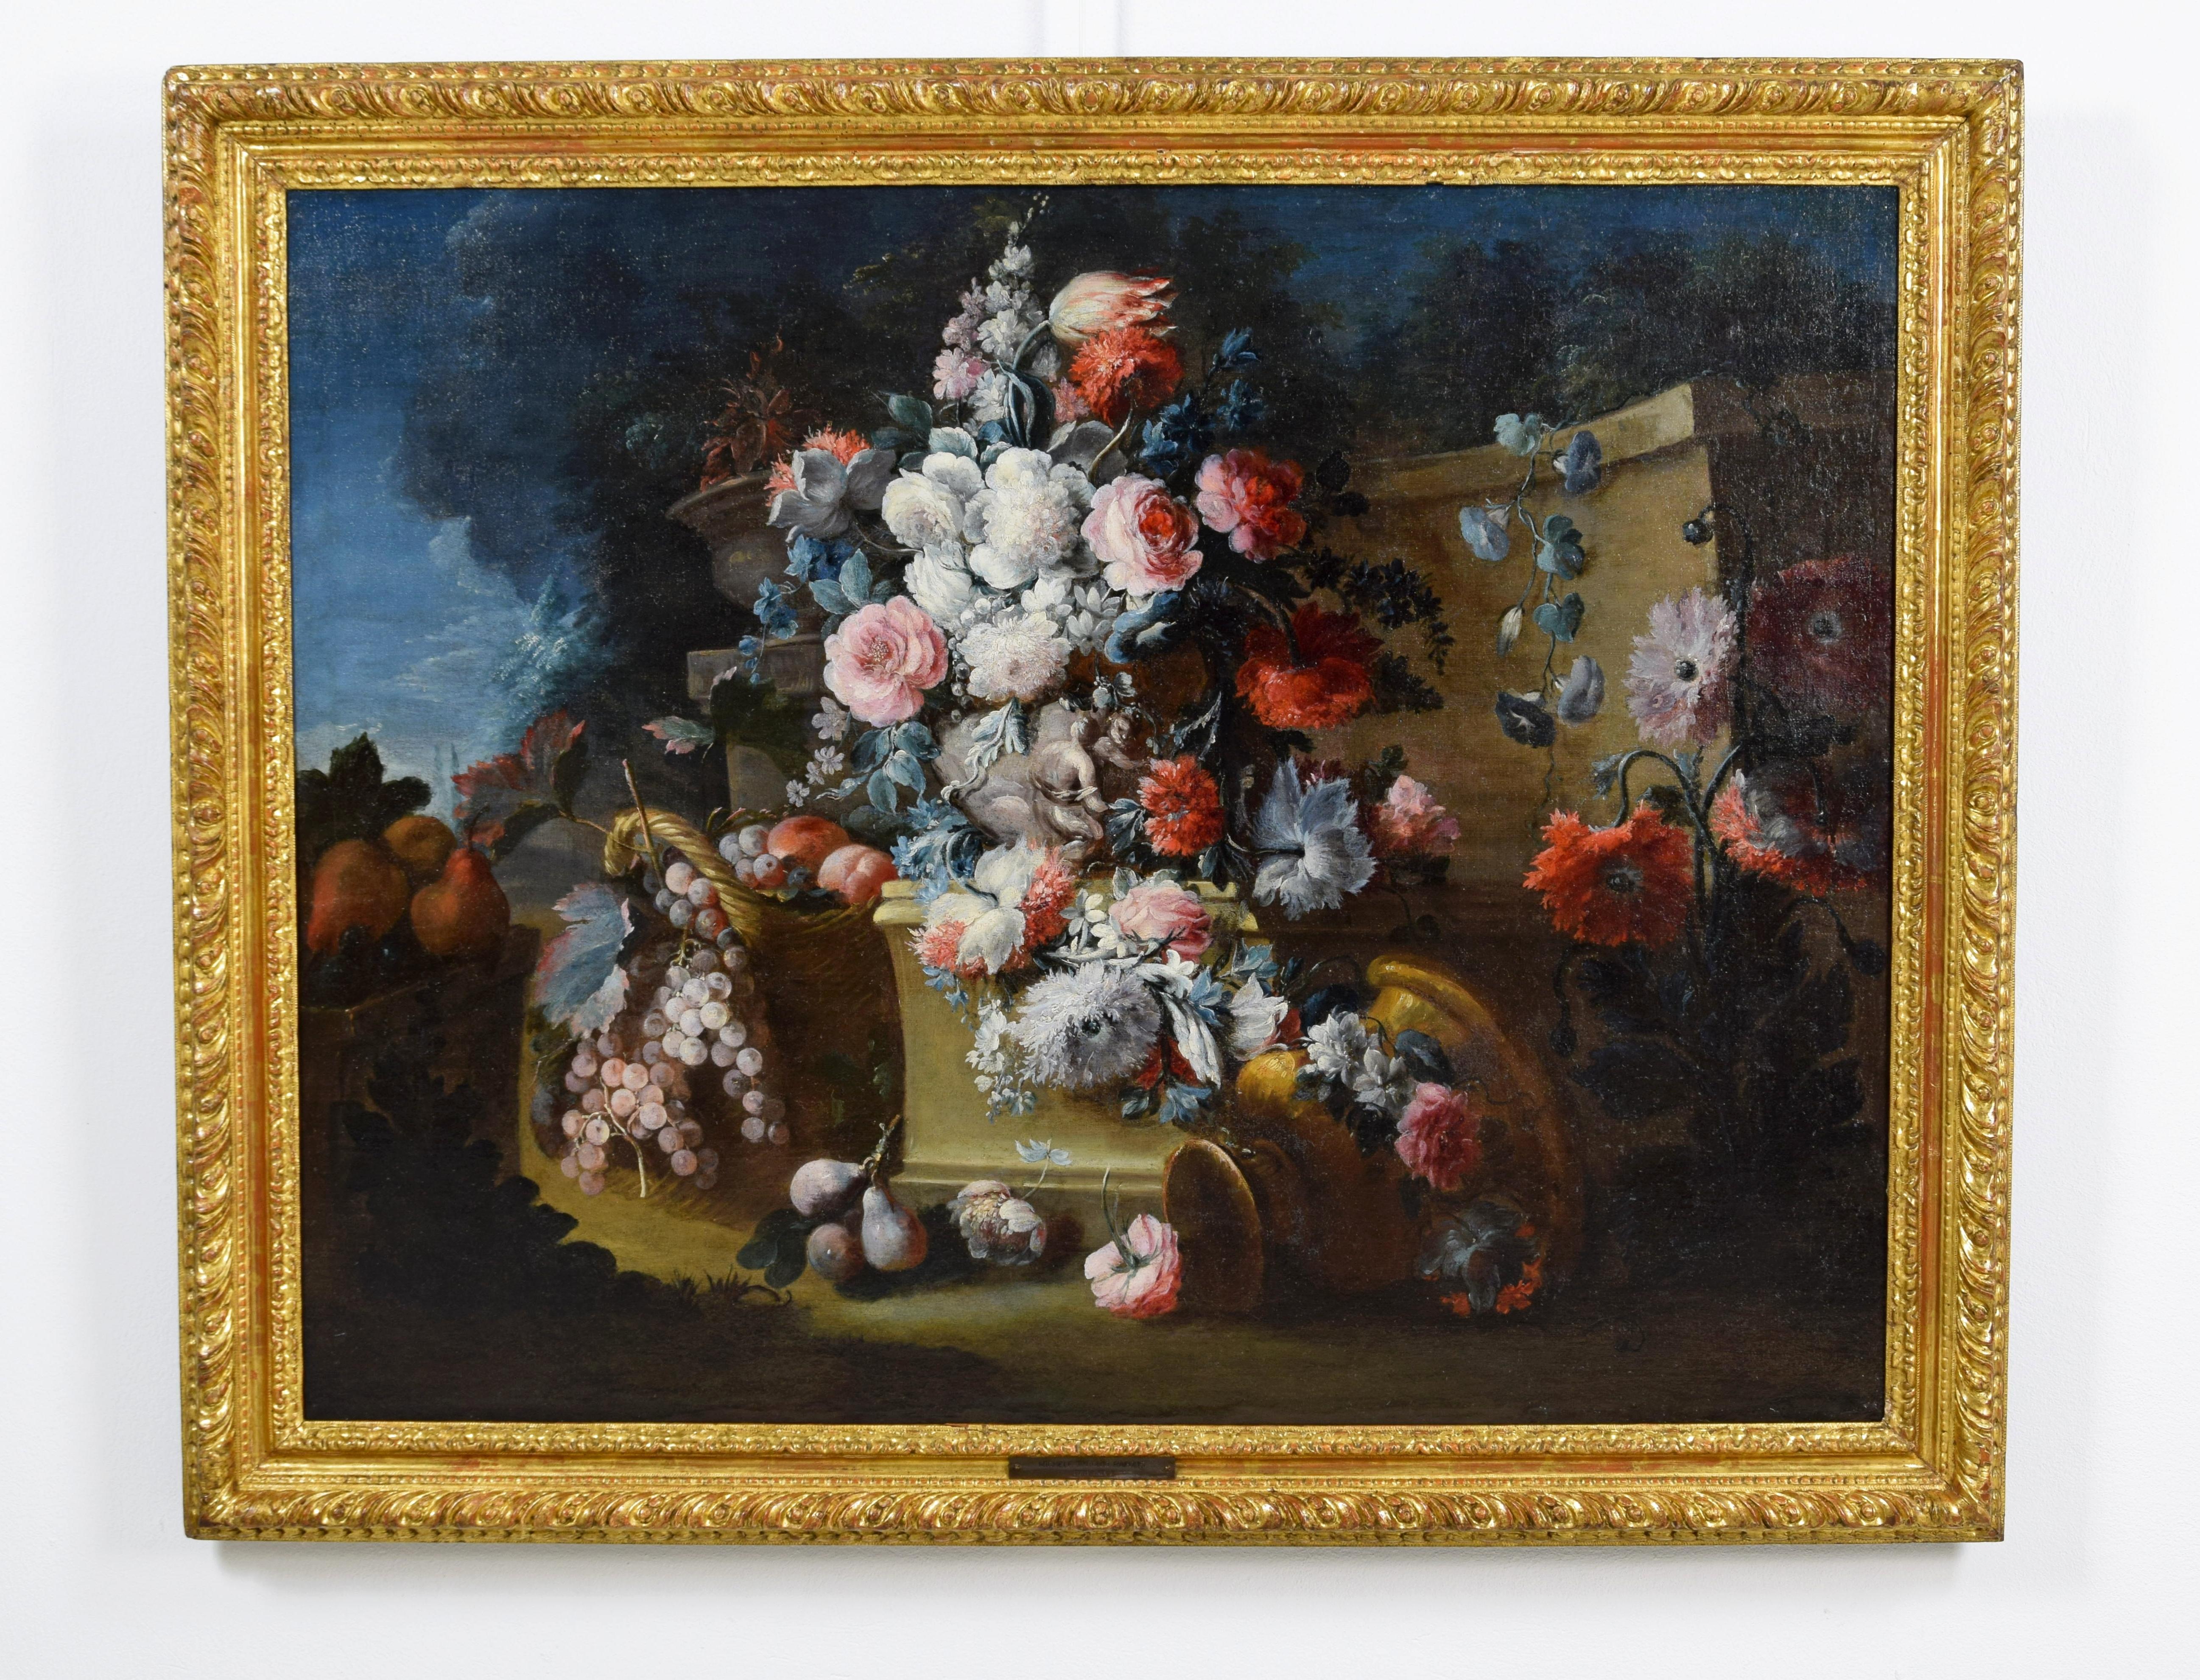 18th century, Italian still life with flowers by Michele Antonio Rapos (Italy 1733-1819)

The canvas, of fine workmanship and under good conditions of maintenance, represents a still life with triumph of flowers and fruits placed in an open space.